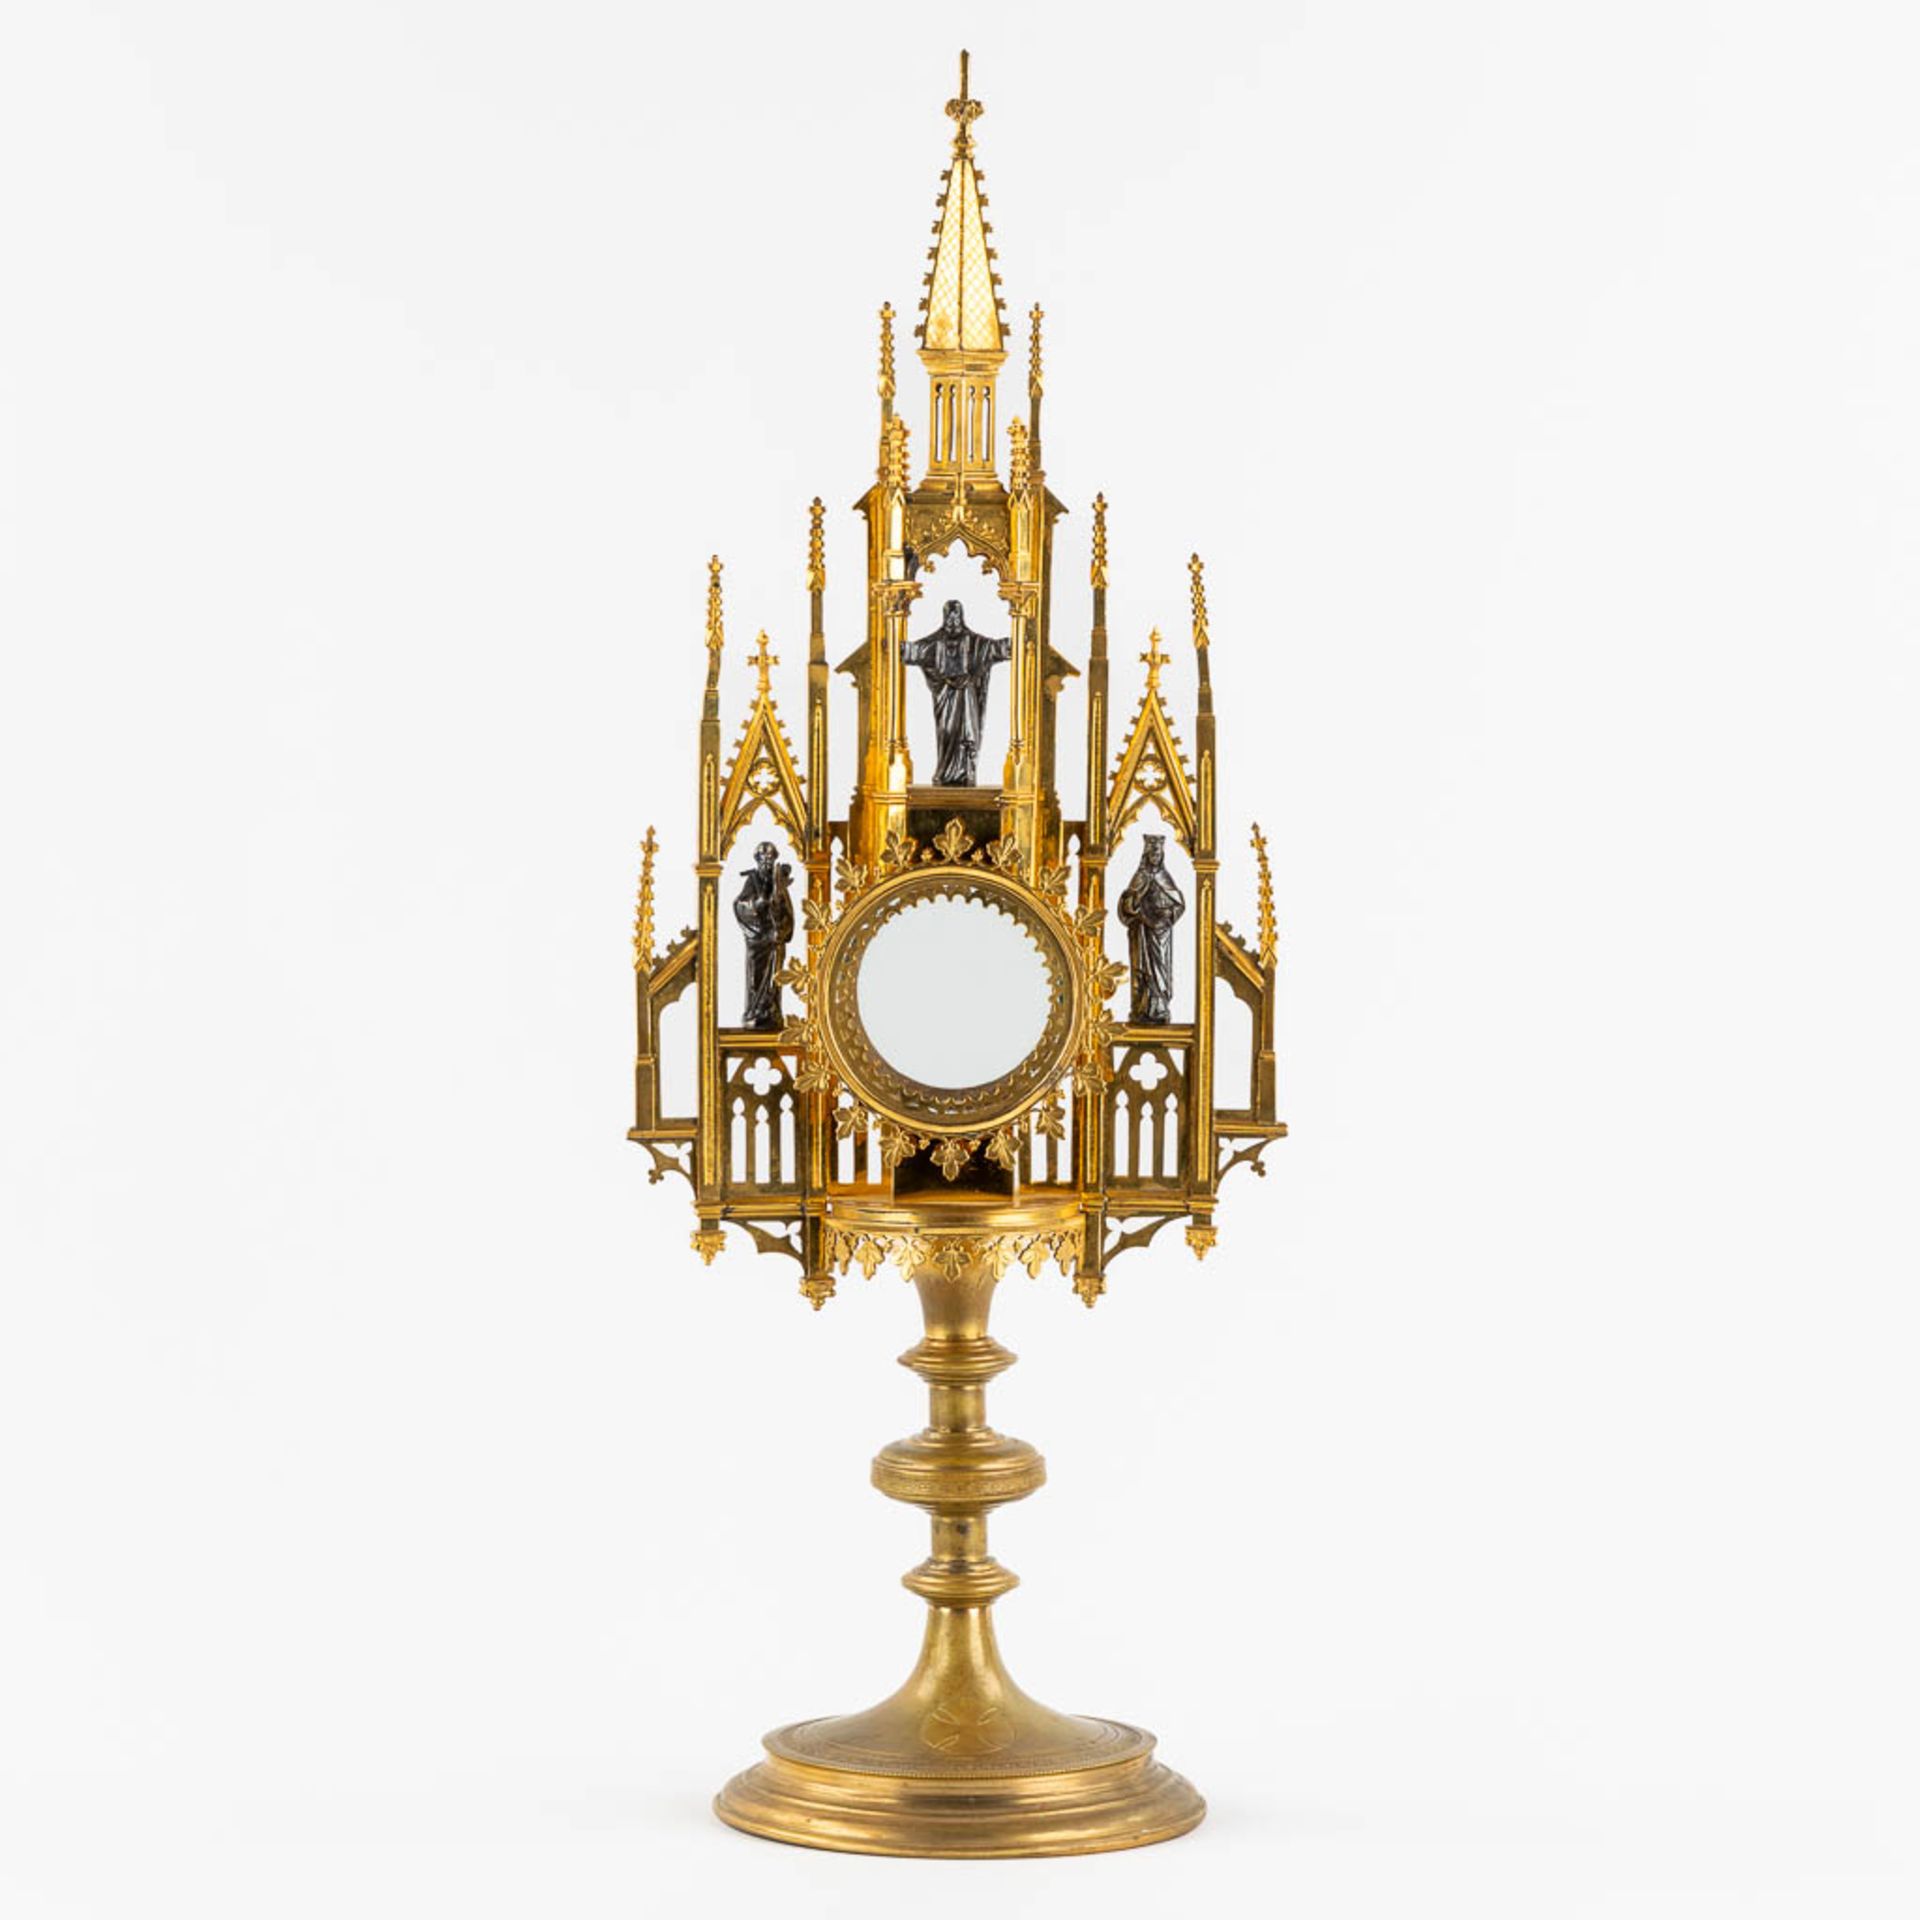 A Tower monstrance, gilt and silver plated brass, Gothic Revival. 19th C. (W:21,5 x H:58 cm)